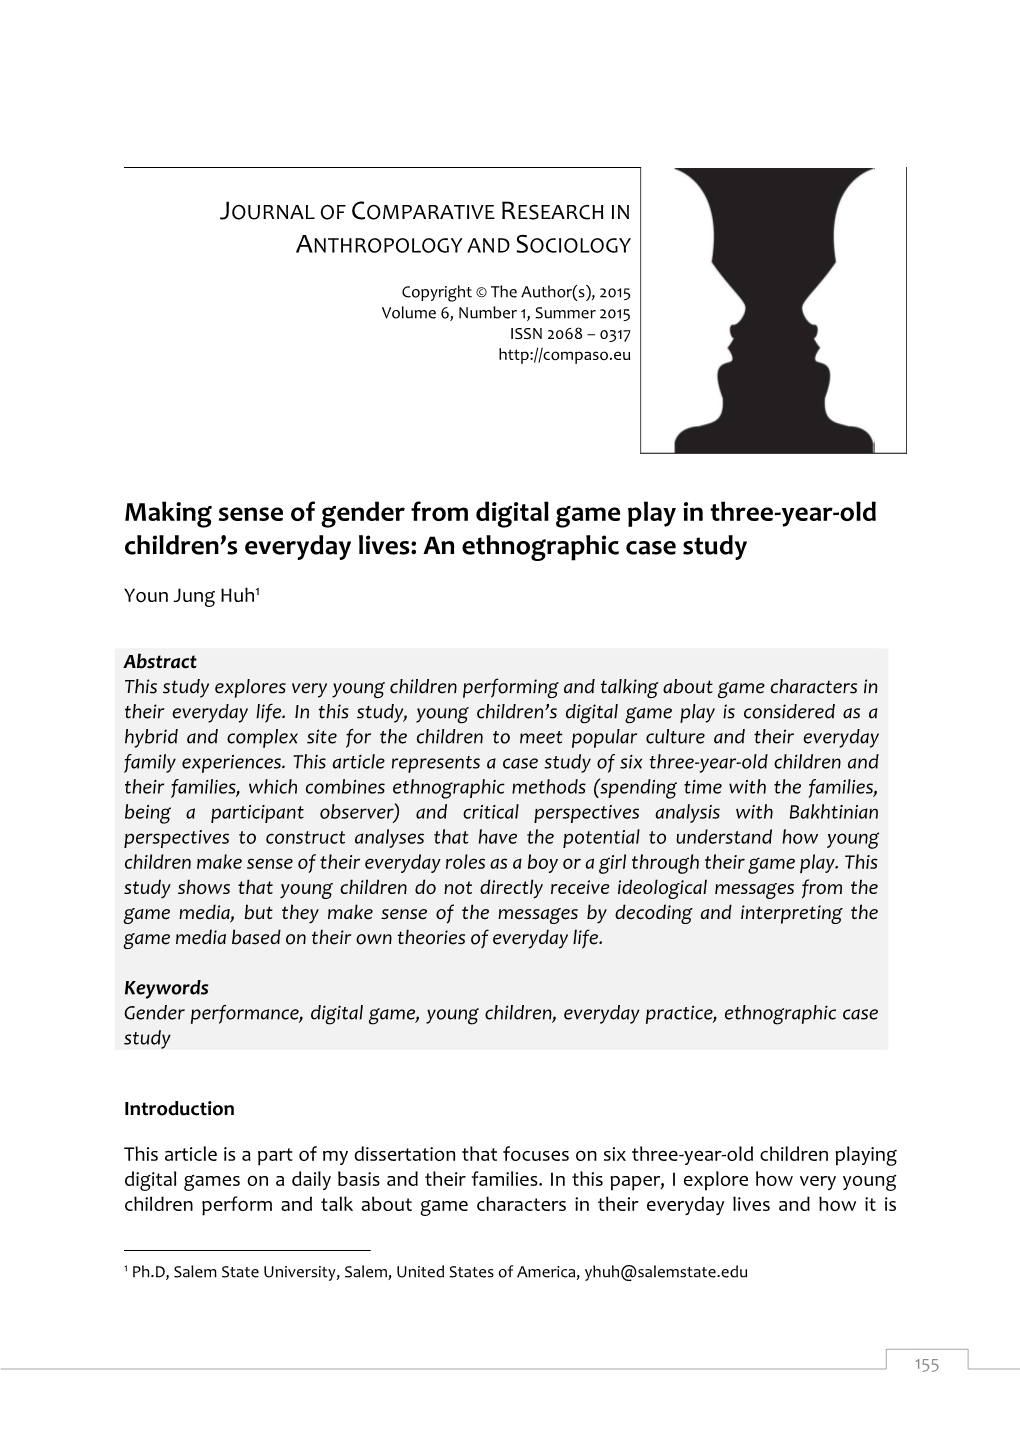 Making Sense of Gender from Digital Game Play in Three-Year-Old Children’S Everyday Lives: an Ethnographic Case Study